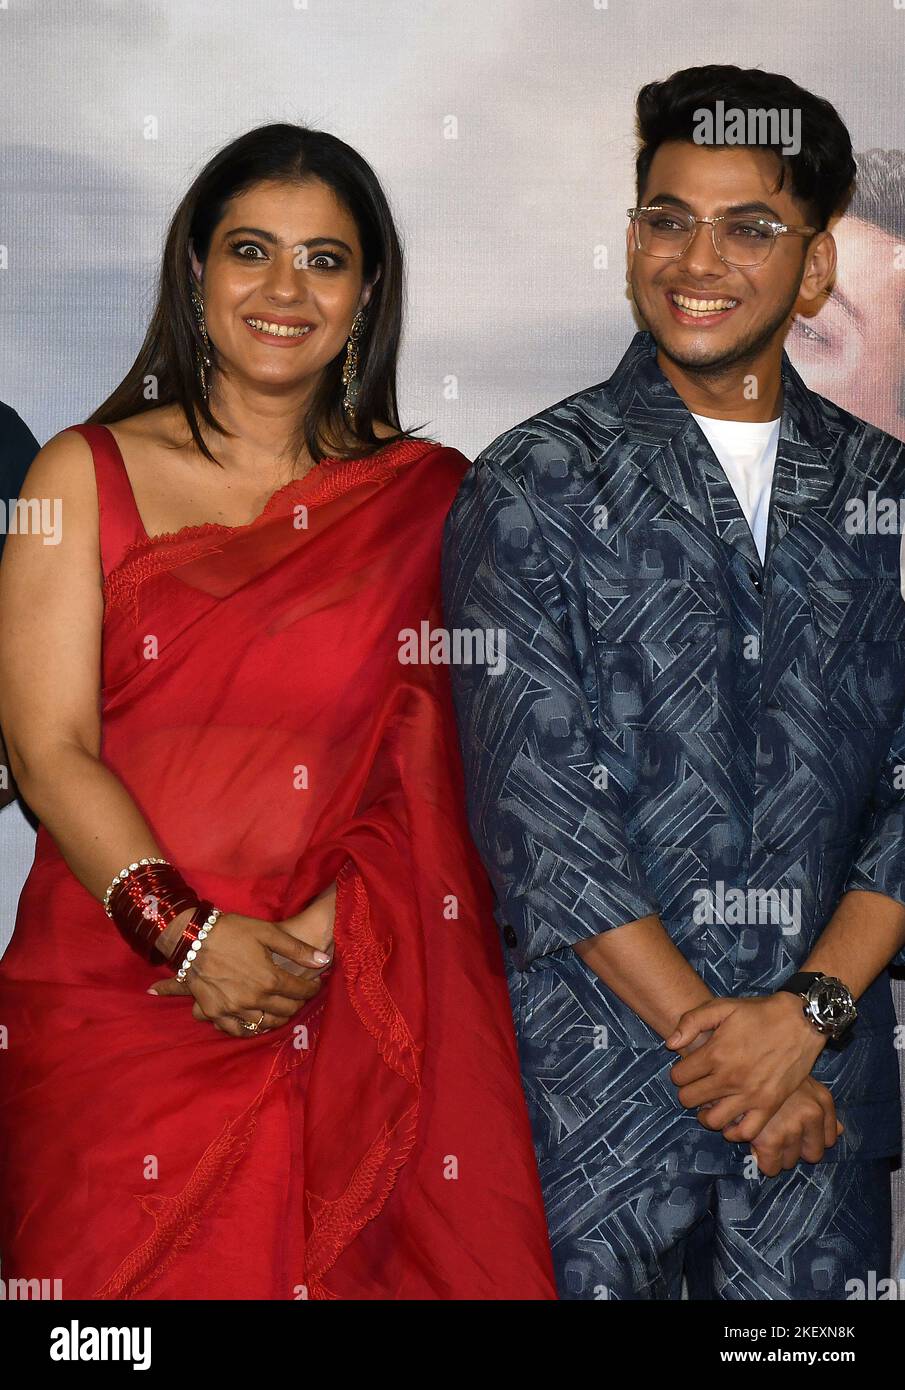 Mumbai, India. 14th Nov, 2022. L-R Bollywood actress Kajol Devgan and television and film actor Vishal Jethwa seen during the trailer launch of their upcoming film 'Salaam Venky' in Mumbai. The film will be released in theaters on 9th December 2022. (Photo by Ashish Vaishnav/SOPA Images/Sipa USA) Credit: Sipa USA/Alamy Live News Stock Photo